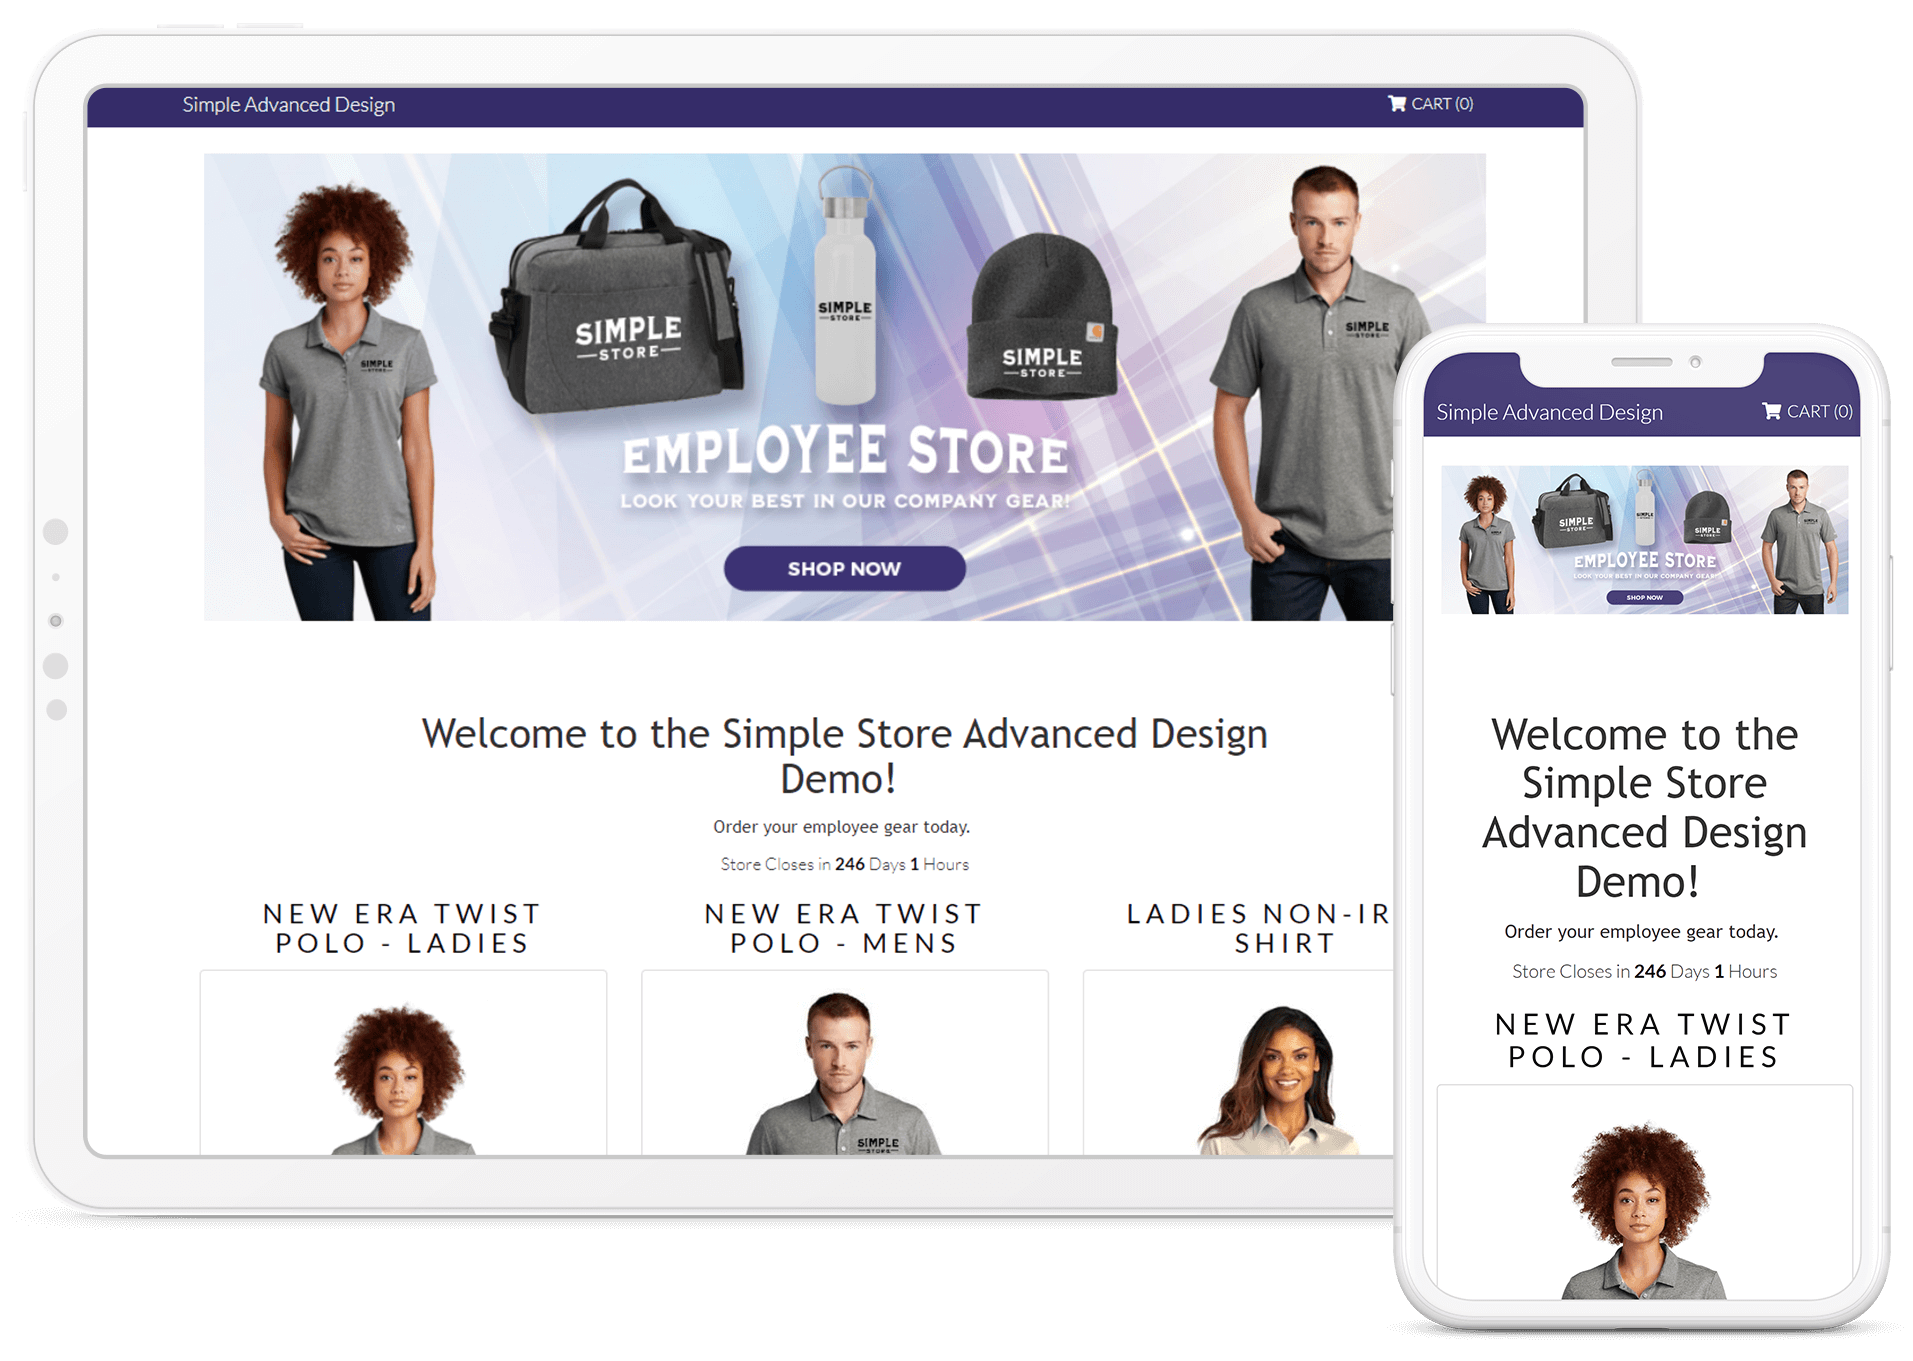 Demo for Simple Store in tablet and mobile view